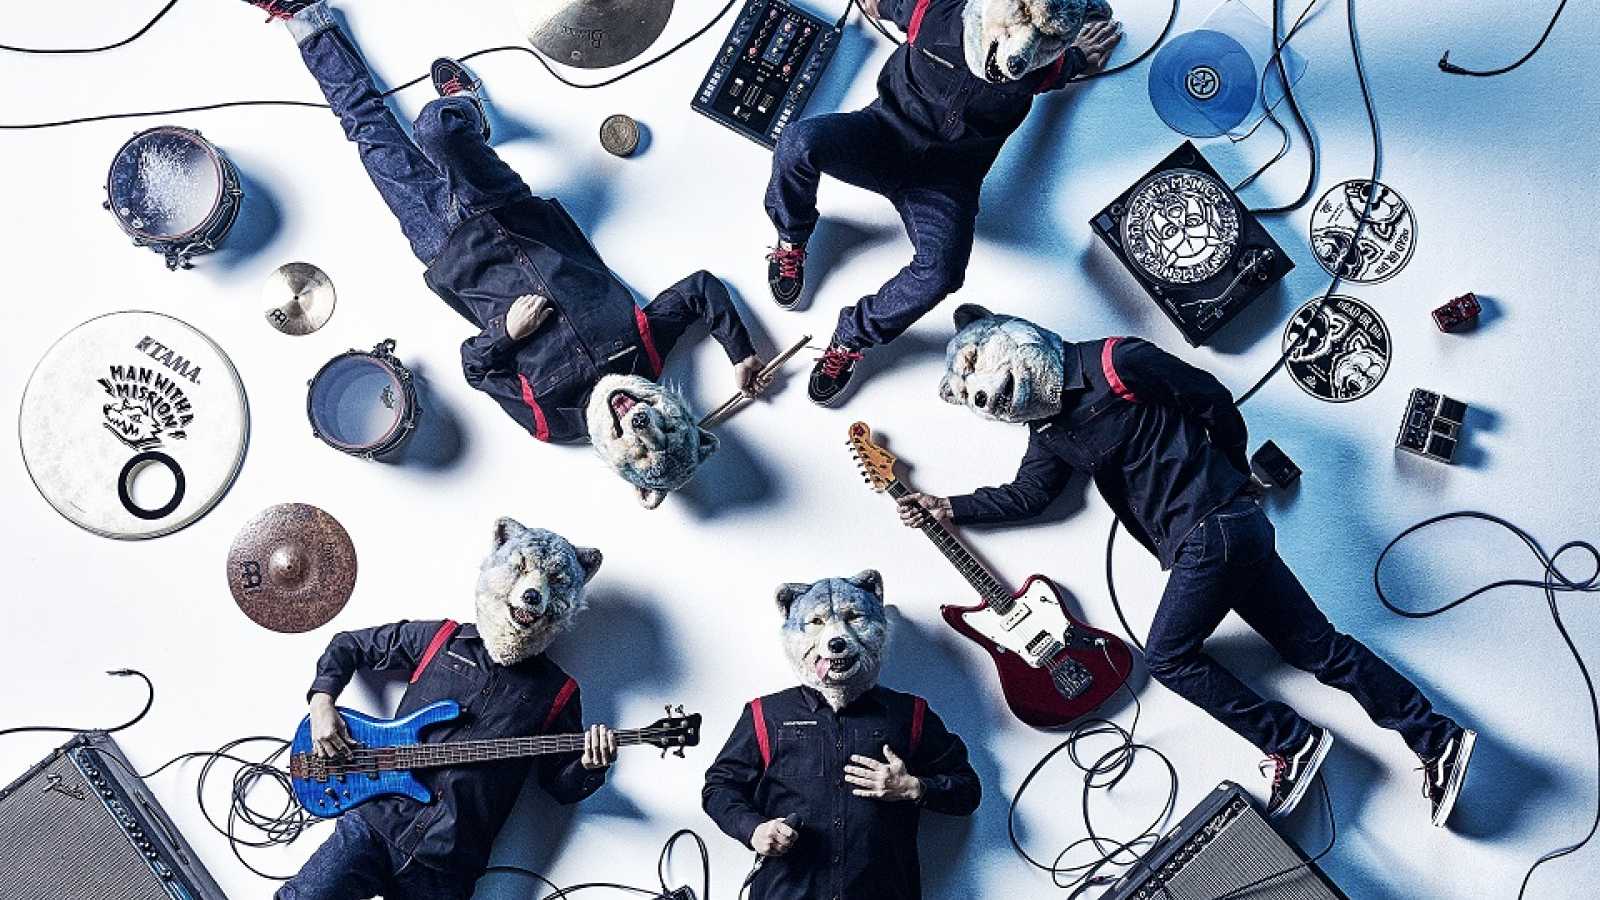 Playlist: J-rock © MAN WITH A MISSION. All rights reserved.